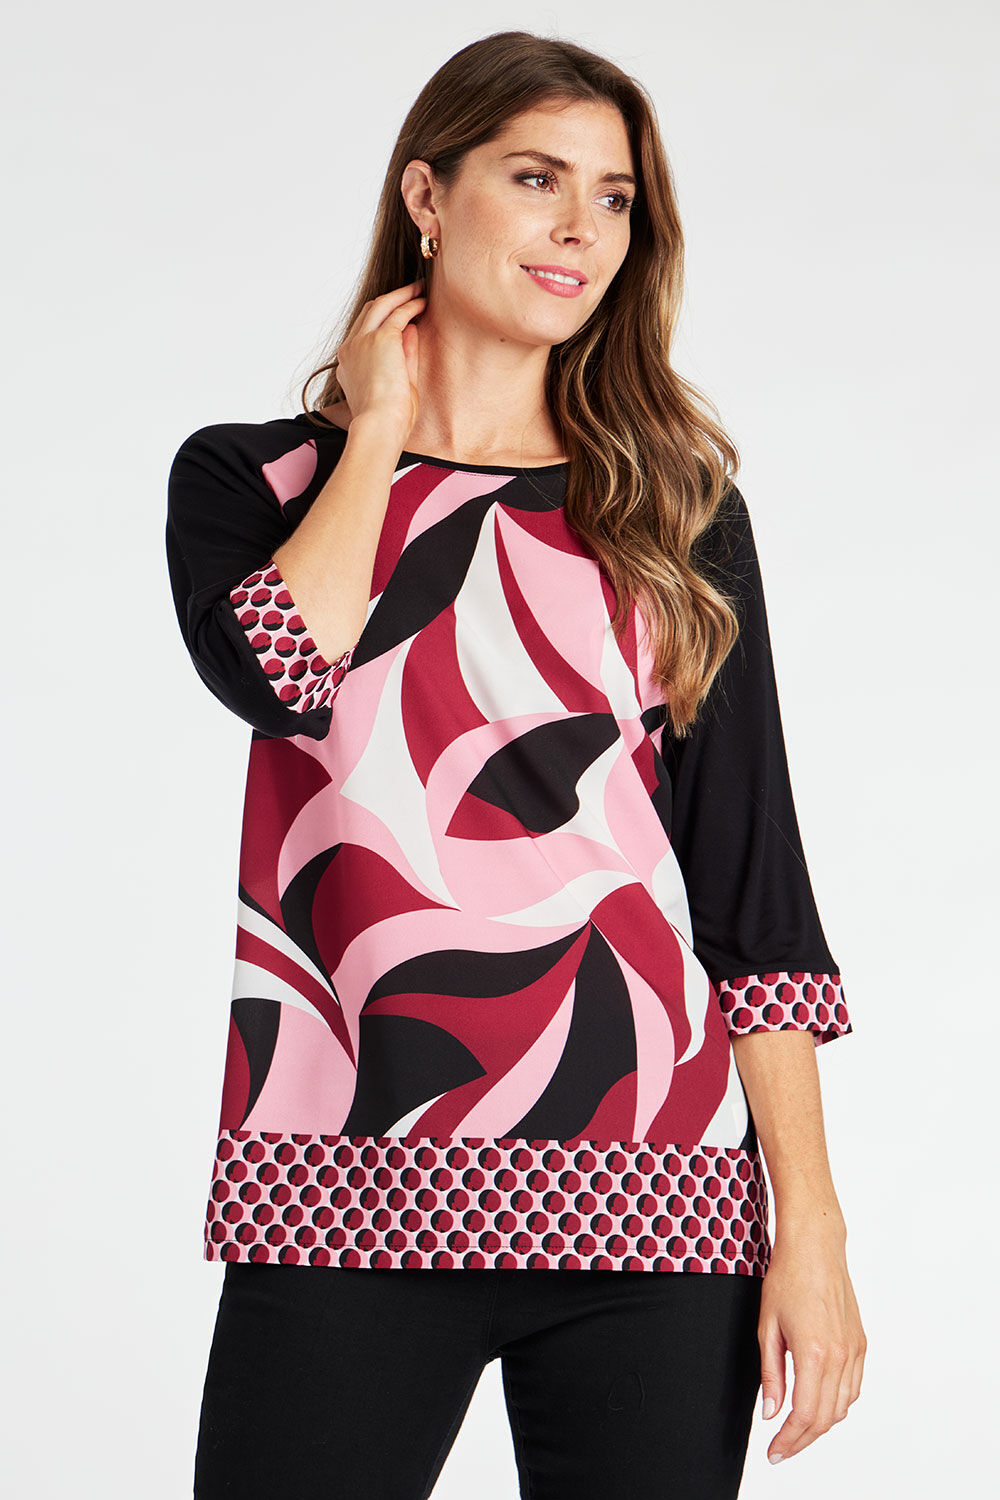 Bonmarche Pink 3/4 Sleeve Wave Print Woven Front Top, Size: 14